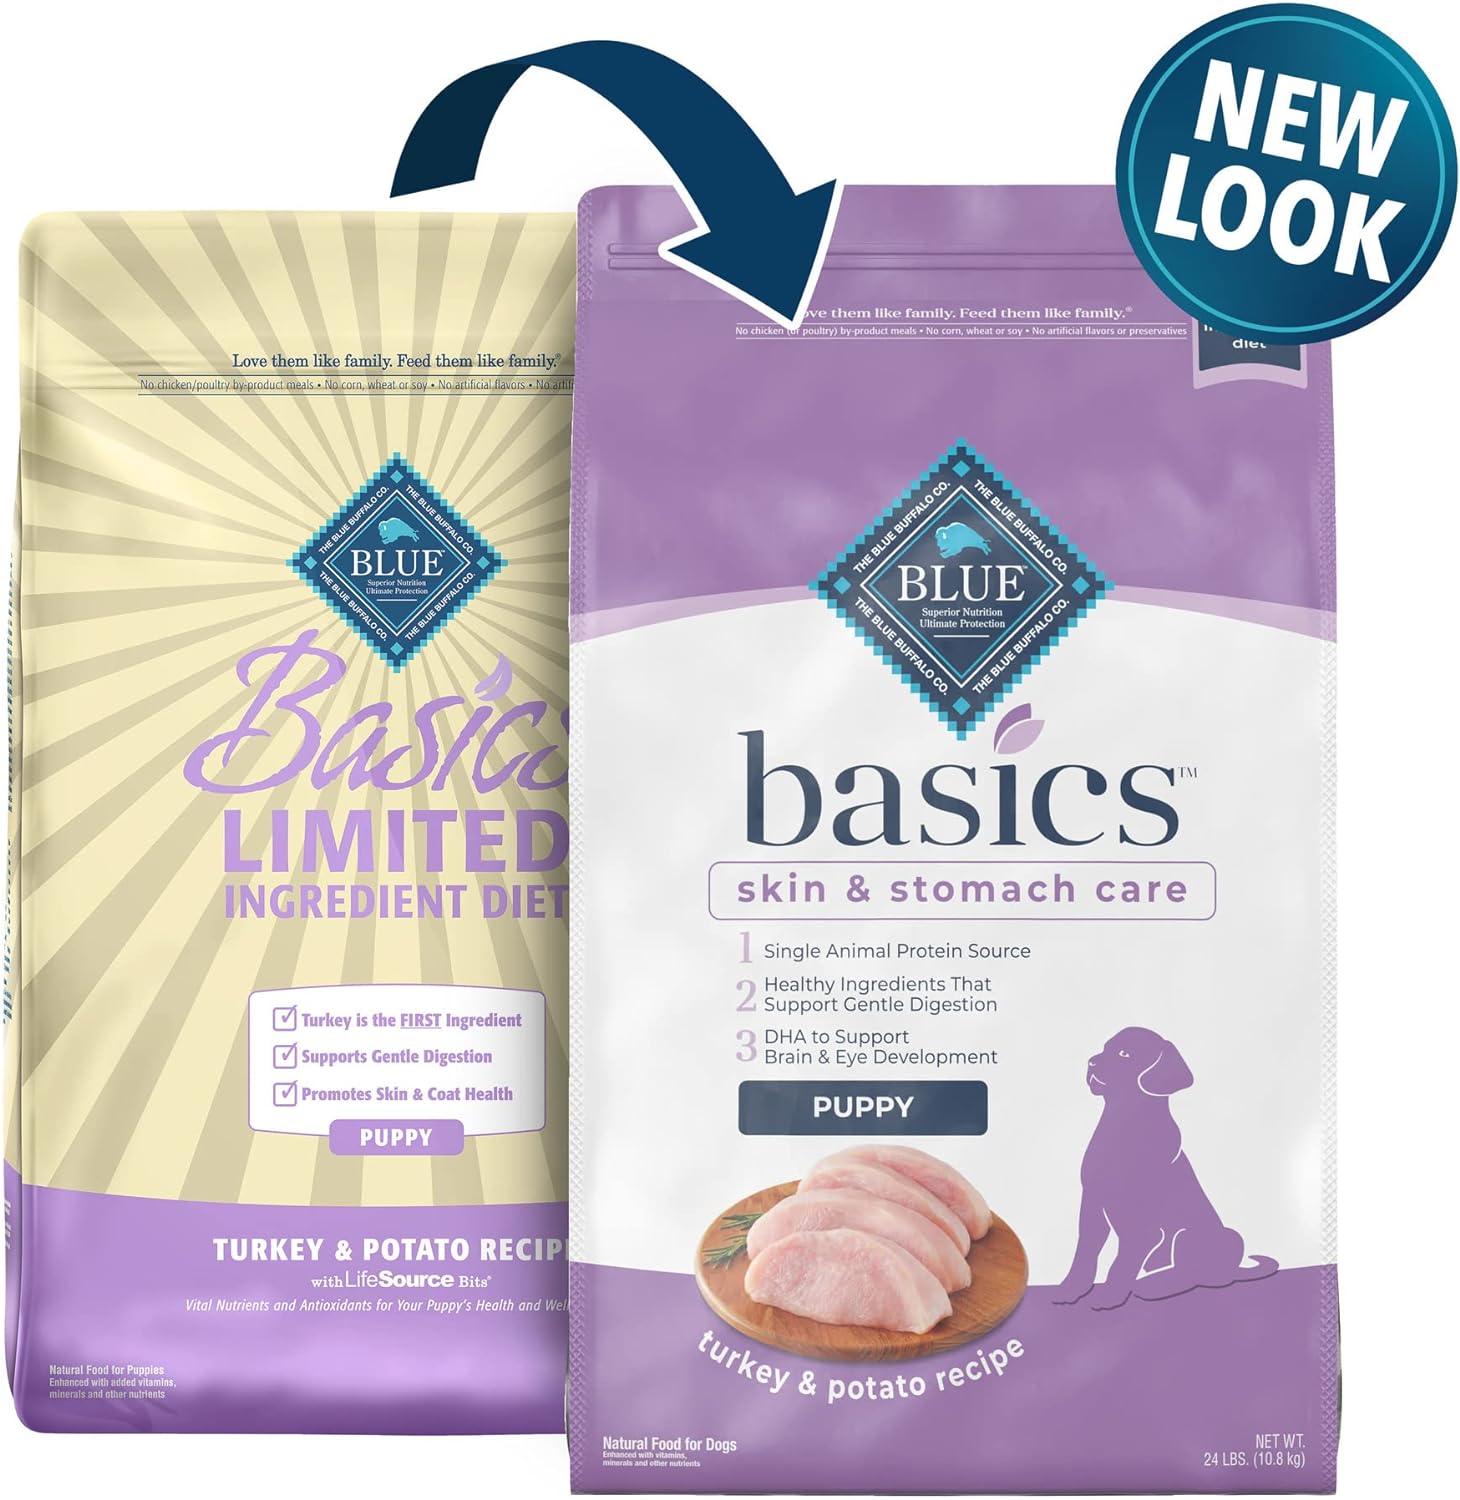 Blue Basics Limited Ingredient Diet Puppy Turkey and Potato Recipe Dry Dog Food – Gallery Image 2